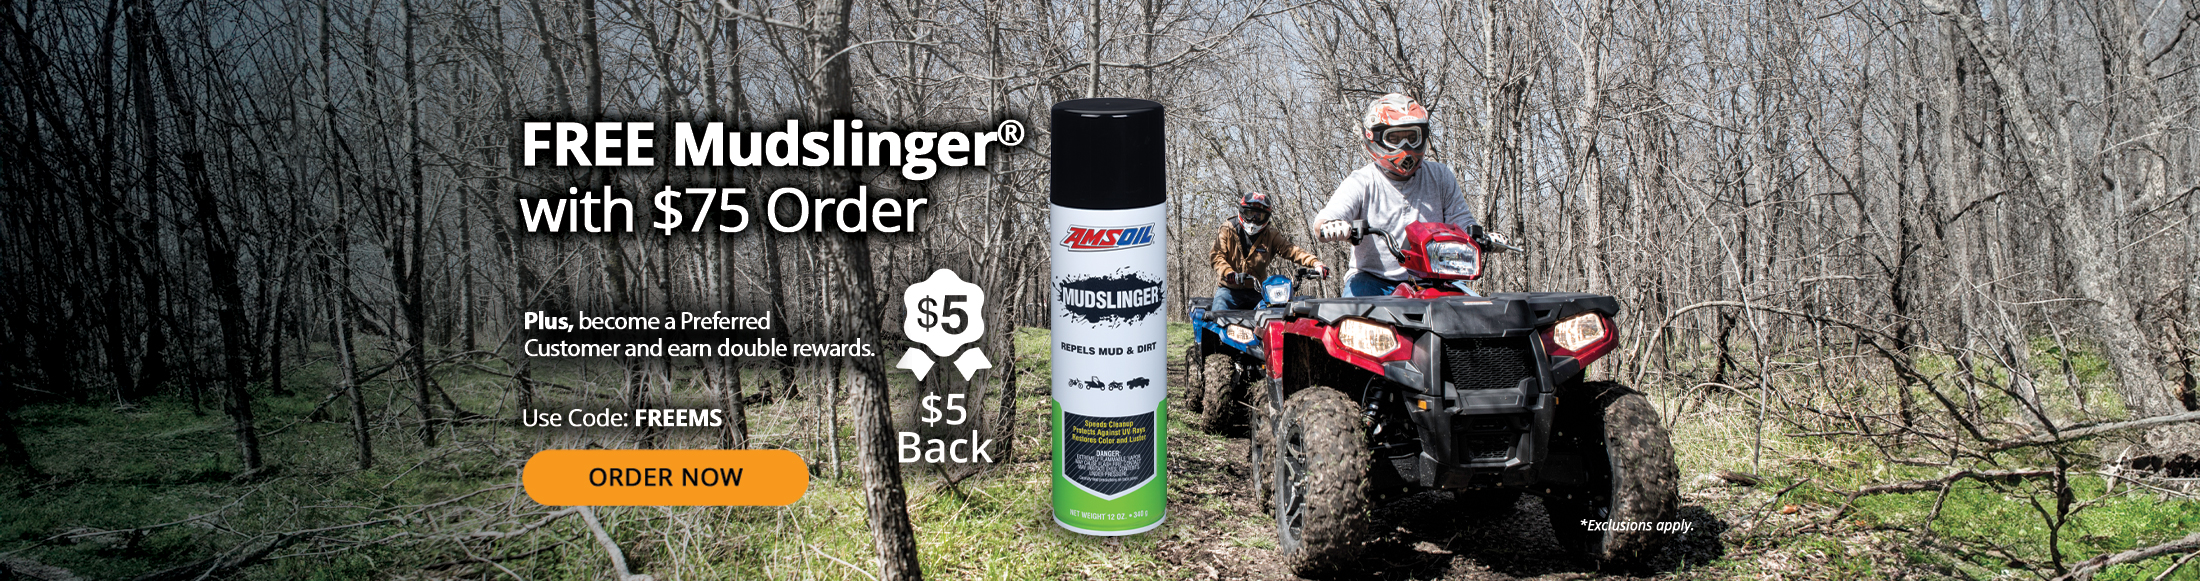 FREE Mudslinger with $75 Order. Plus, become a Preferred Customer and earn double rewards, including $5 back. Order Now. Use Code: FREEMS. *Exclusions apply.